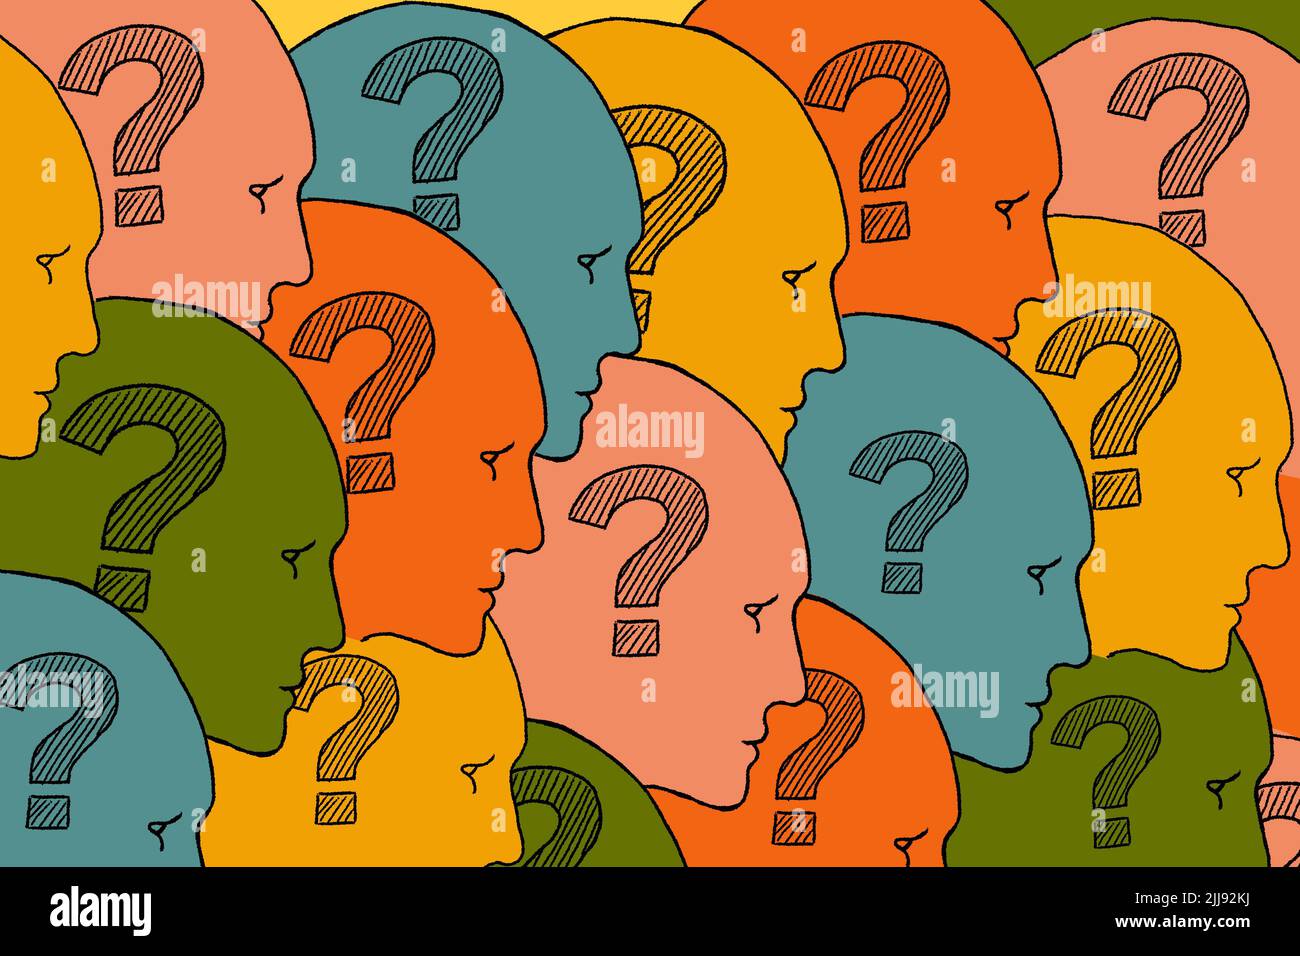 Human faces with question marks inside. FAQ. Frequently Asked Questions. Stock Photo